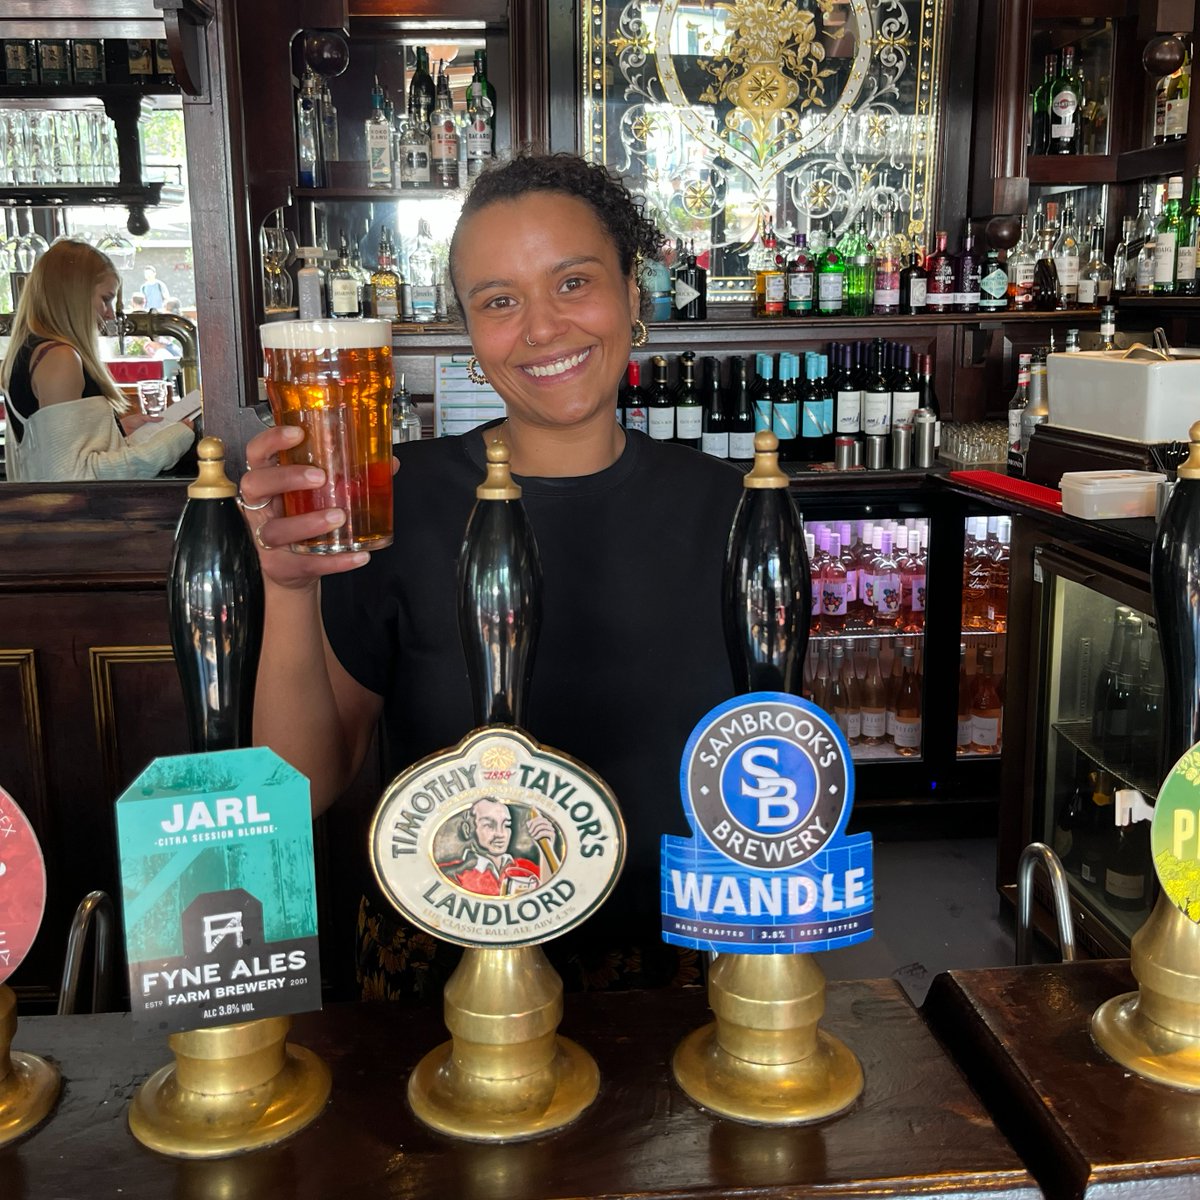 A beautiful pint of Landlord poured by Marion at White Horse, Fullham. Sparkler.✔️ The legendary pub is perched just on the edge of Parsons Green, they have fantastic outdoor seating and great food. 🌤️